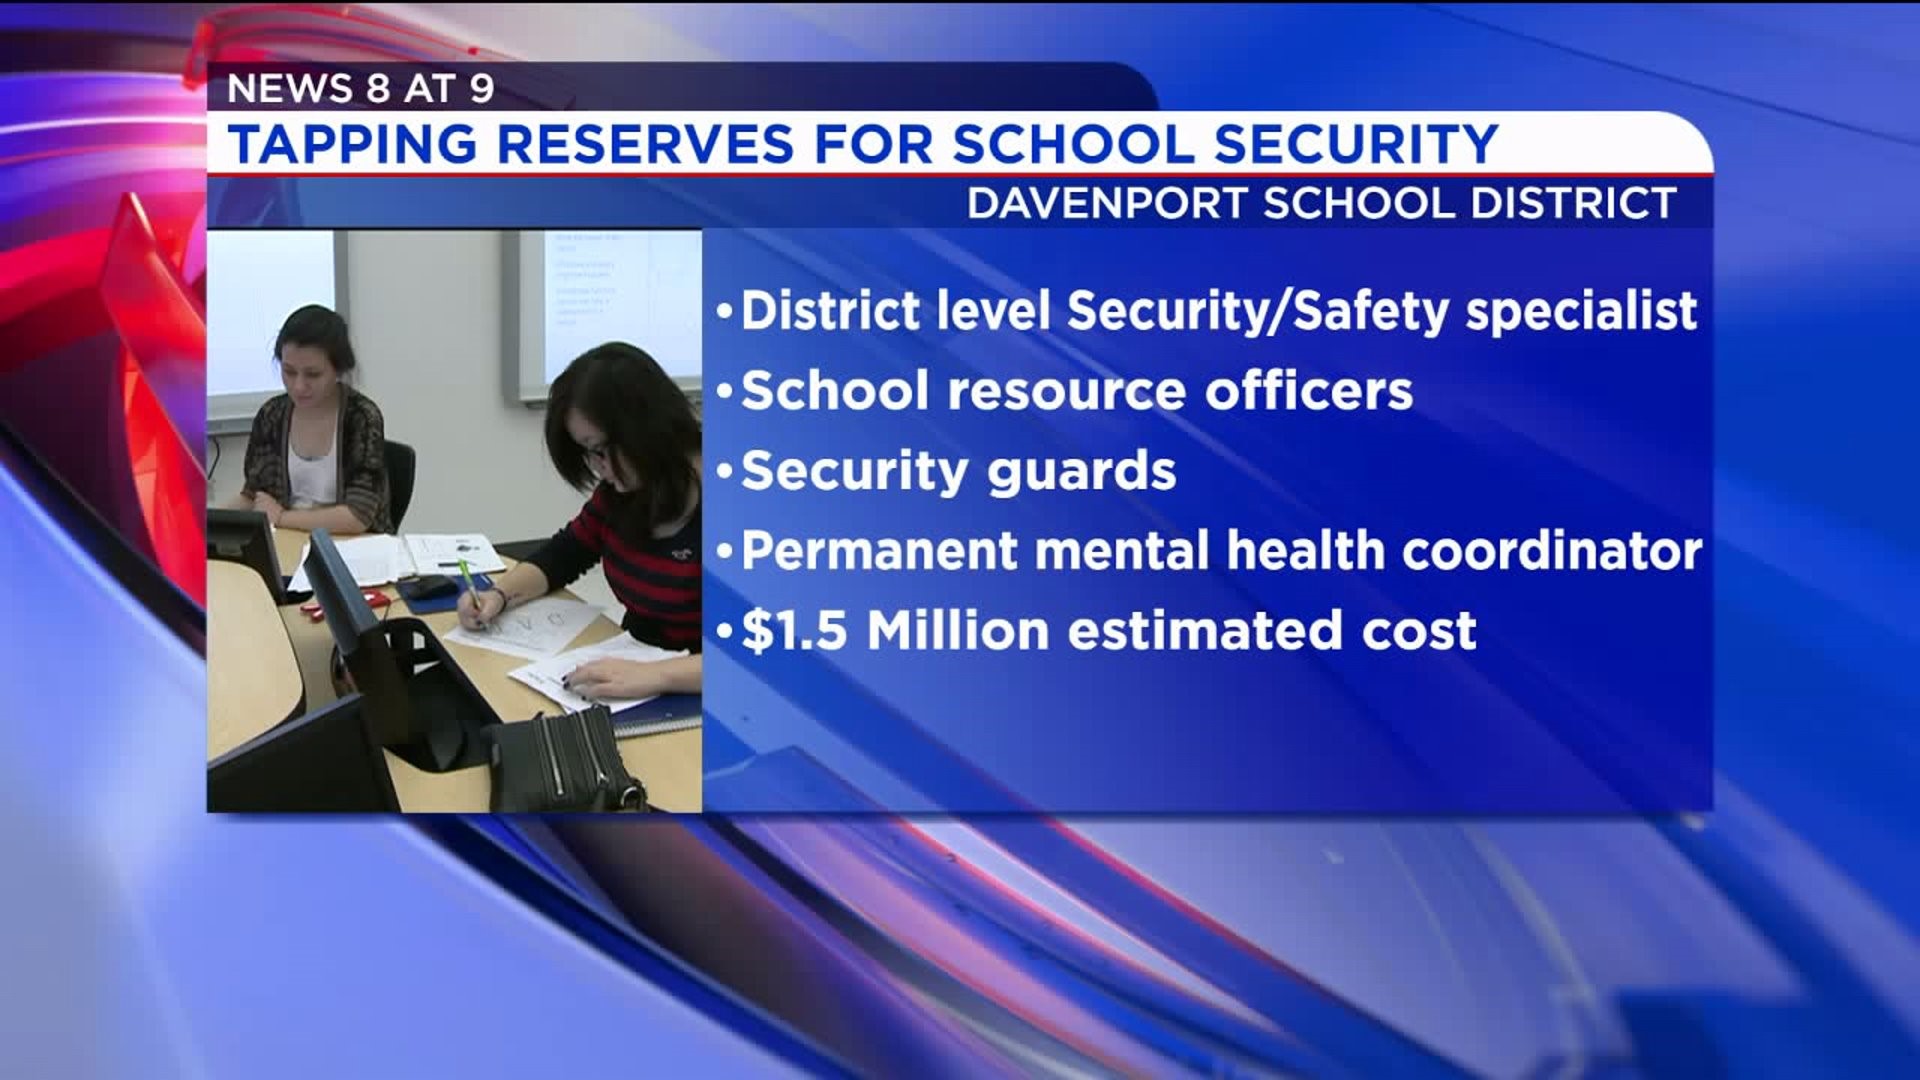 Davenport wants to use reserve funds to make sure students are safe